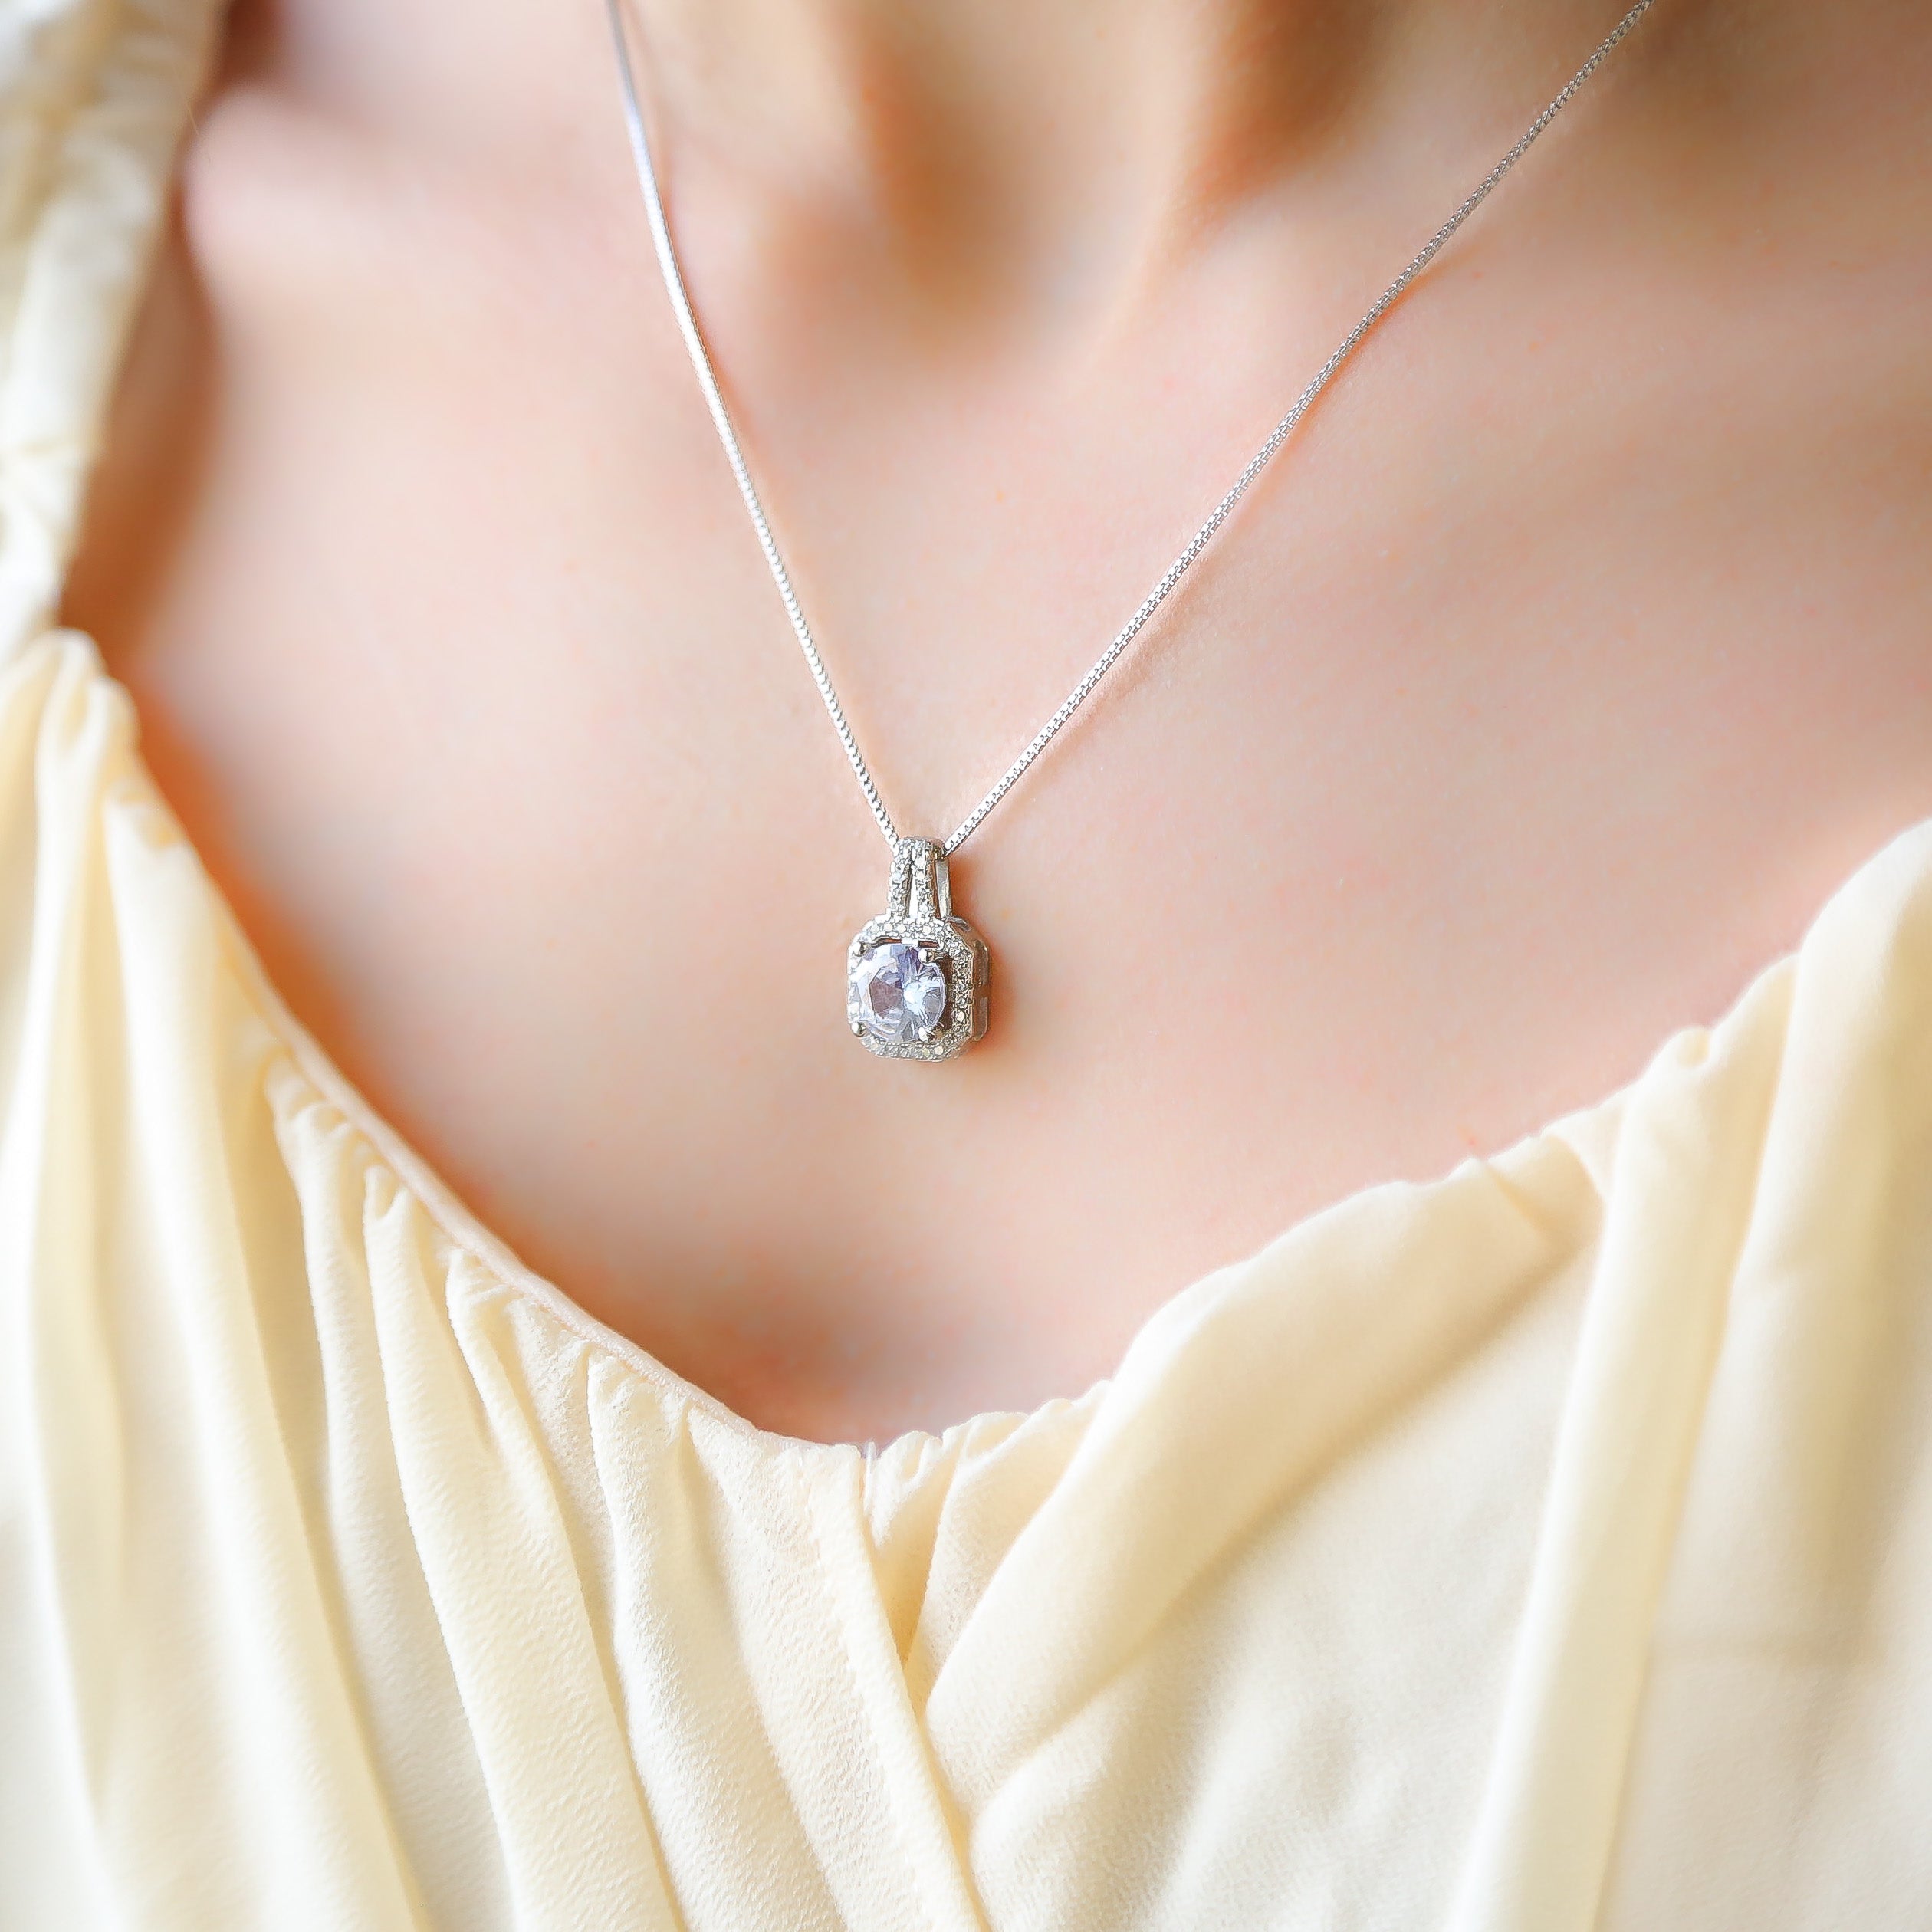 FOREVER - 925 Sterling Silver Necklace with Zircon Pendant